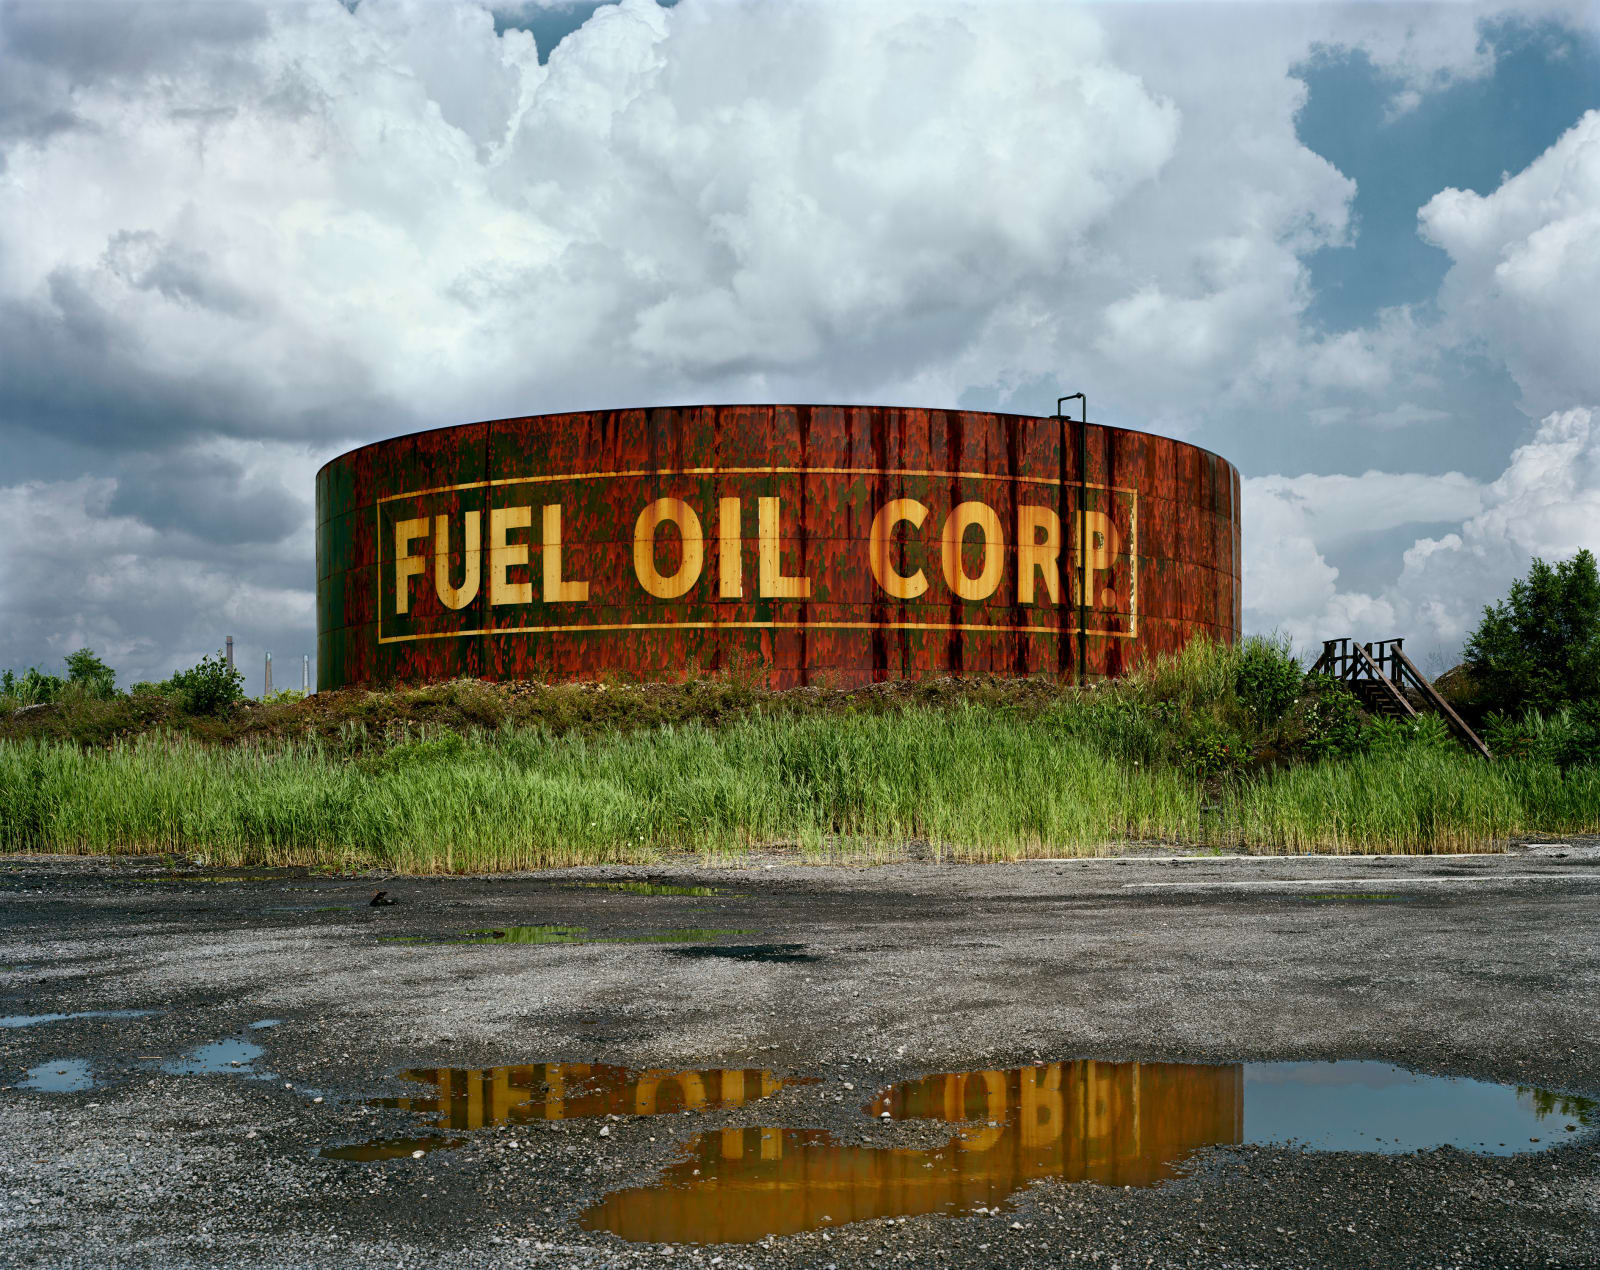 Andrew Moore, Fuel Oil Corp, 2008